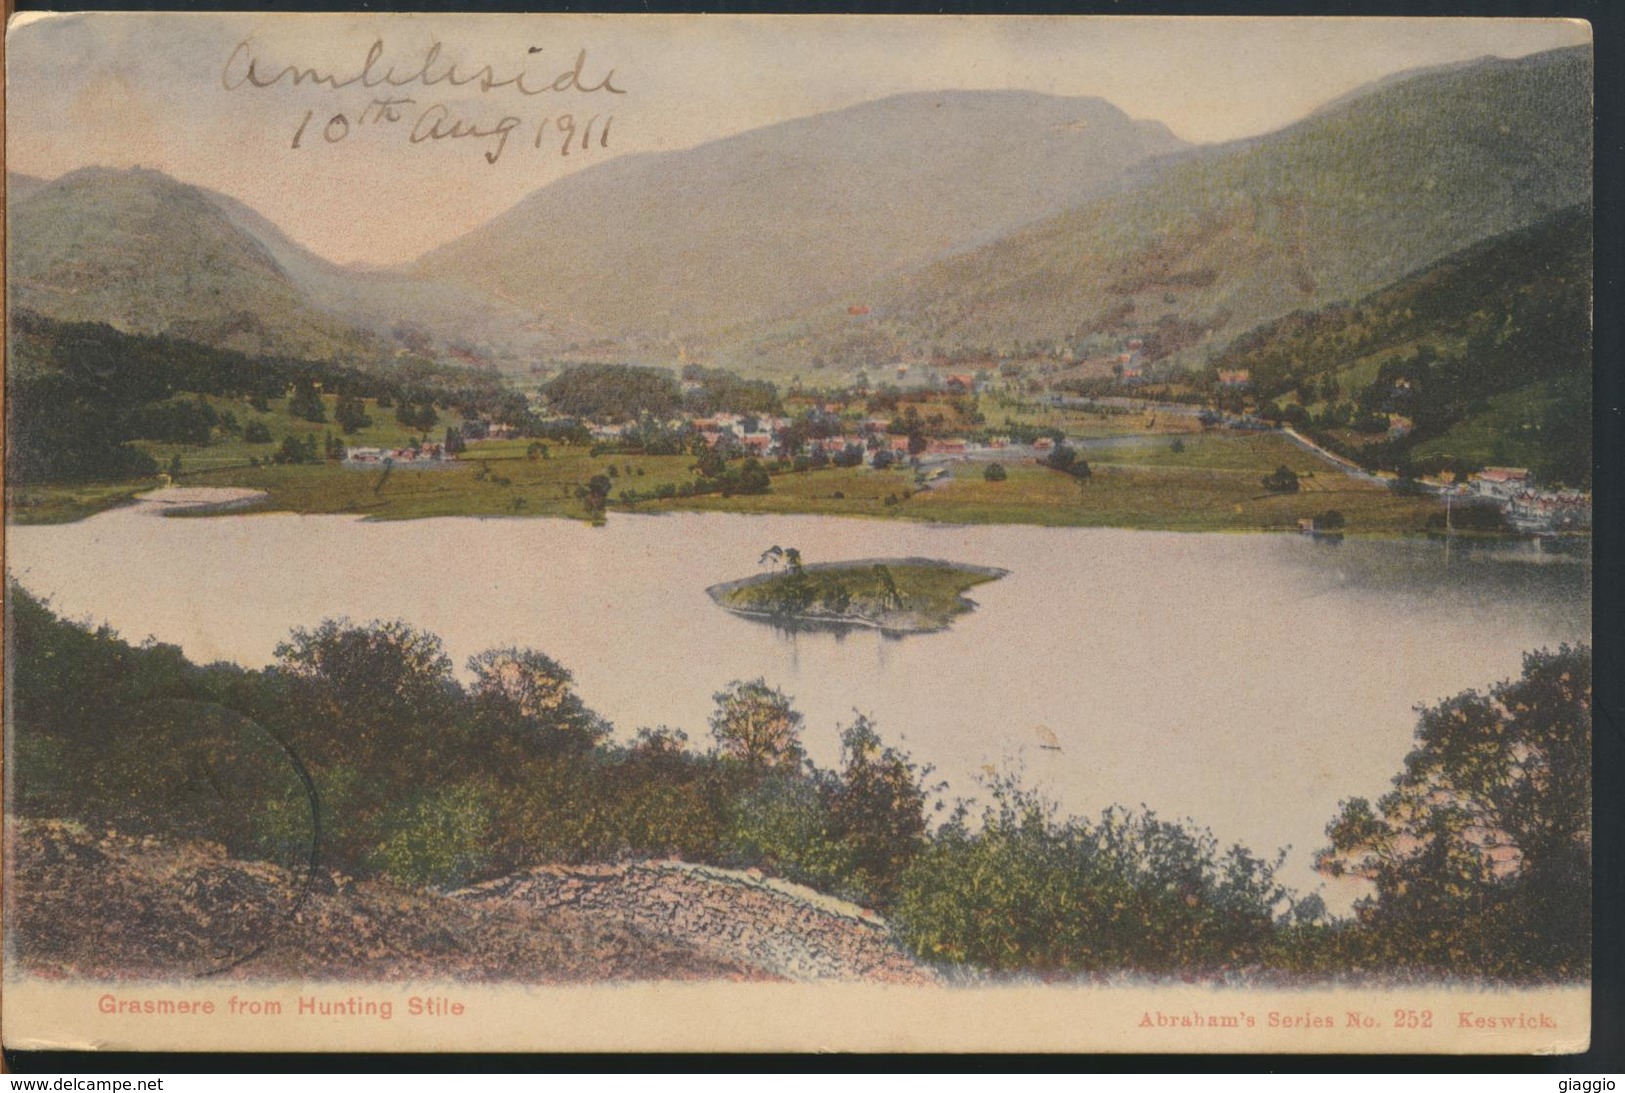 °°° 12245 - UK - GRASMERE FROM HUNTING STILE - 1911 With Stamps °°° - Grasmere